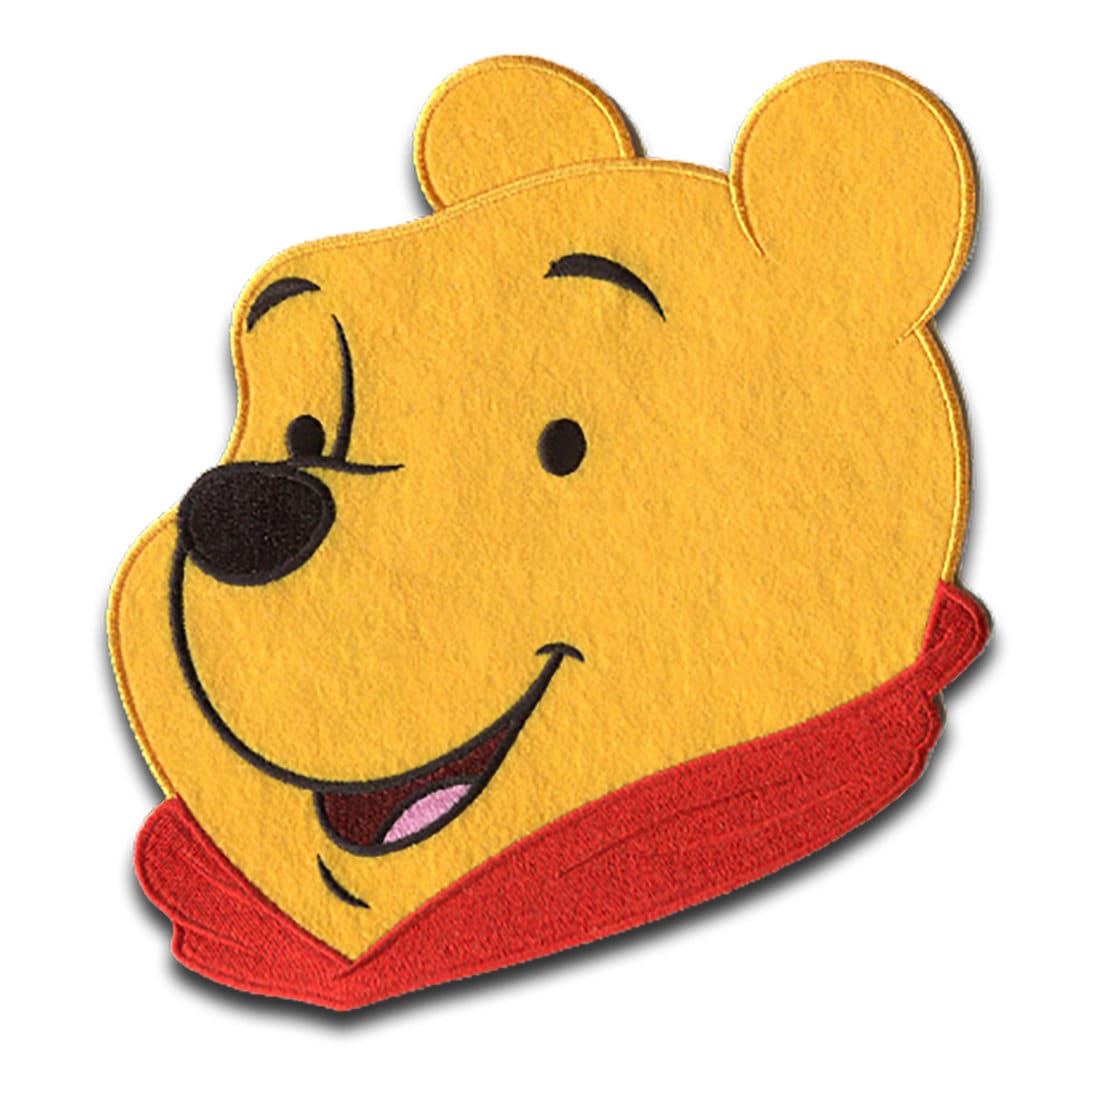 Exclusive Winnie the Pooh Iron-on Patch 